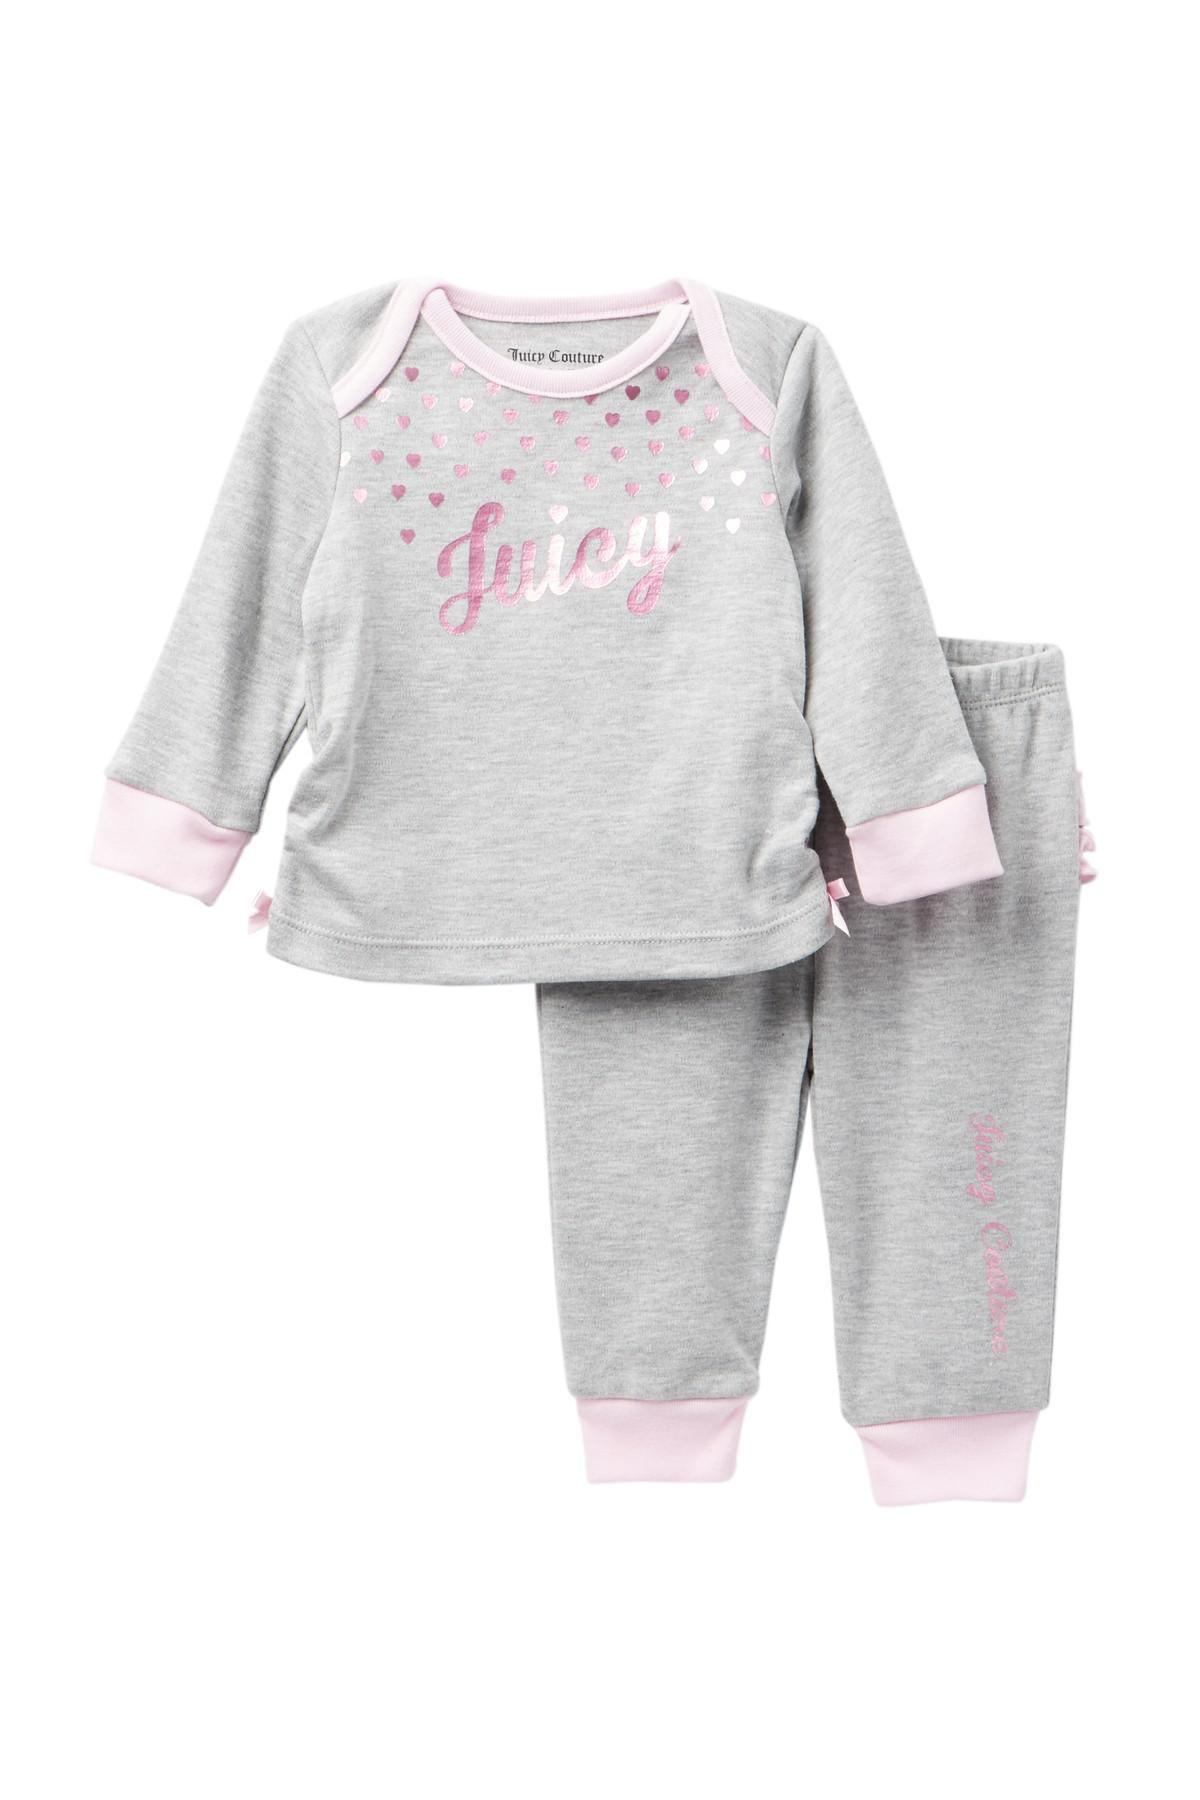 Juicy Couture Hearts Logo - Lyst Couture Hearts Top & Ruffle Bottom Pants Set baby